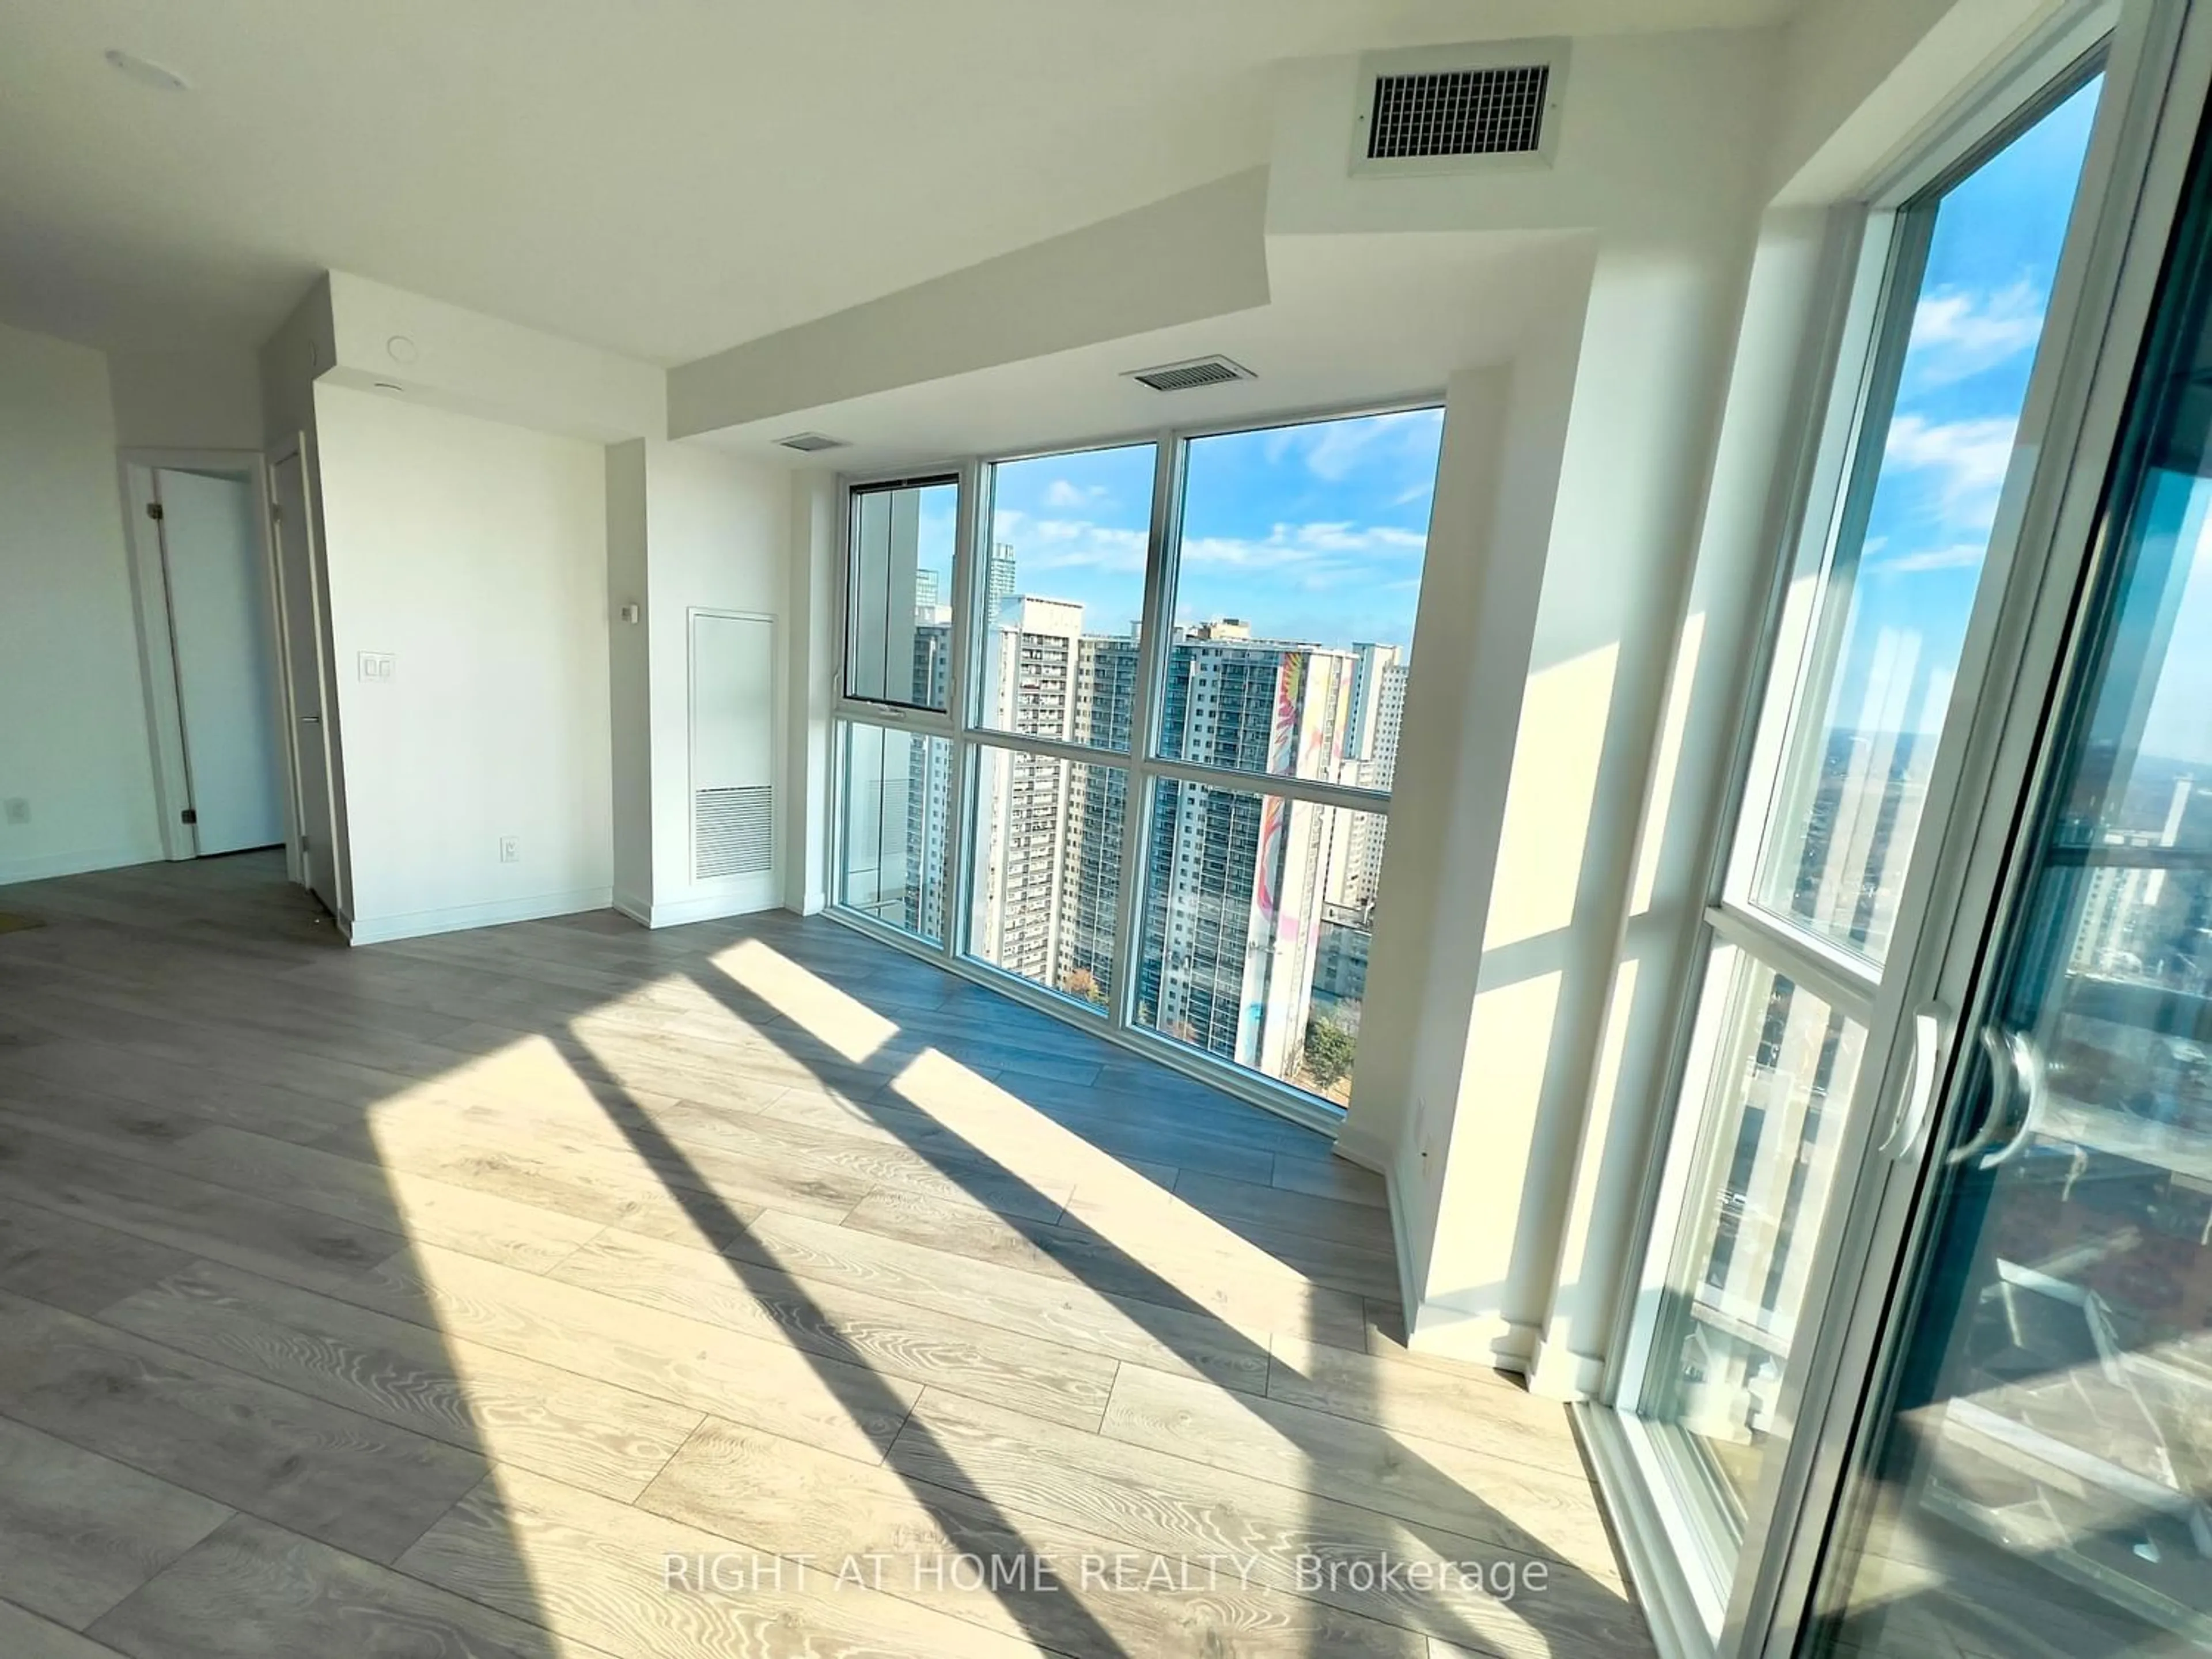 Other indoor space for 159 Wellesley St #2404, Toronto Ontario M4Y 0H5